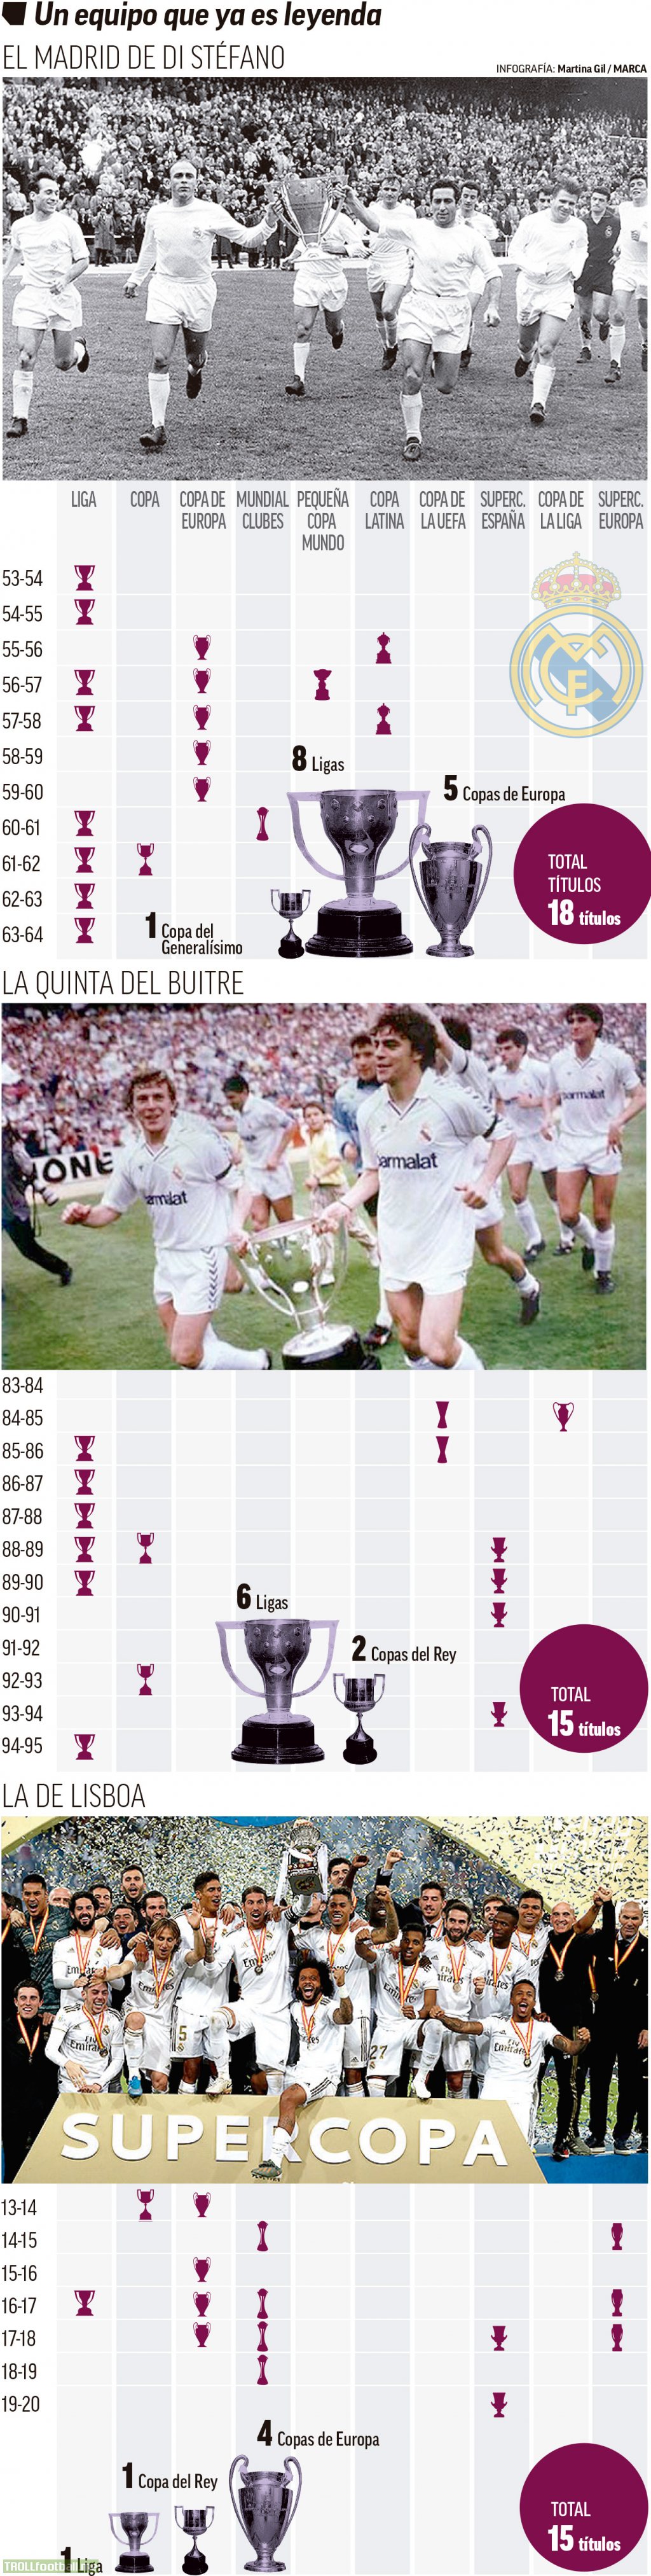 [Marca] The 'Lisbon Generation' establish themselves as one of Real Madrid's great squads winning 15 trophies making the current crop of Madrid players now hitting the heights shown by the Quinta del Buitre side - who won 15 titles - and Alfredo di Stefano's team - who won 18 titles.